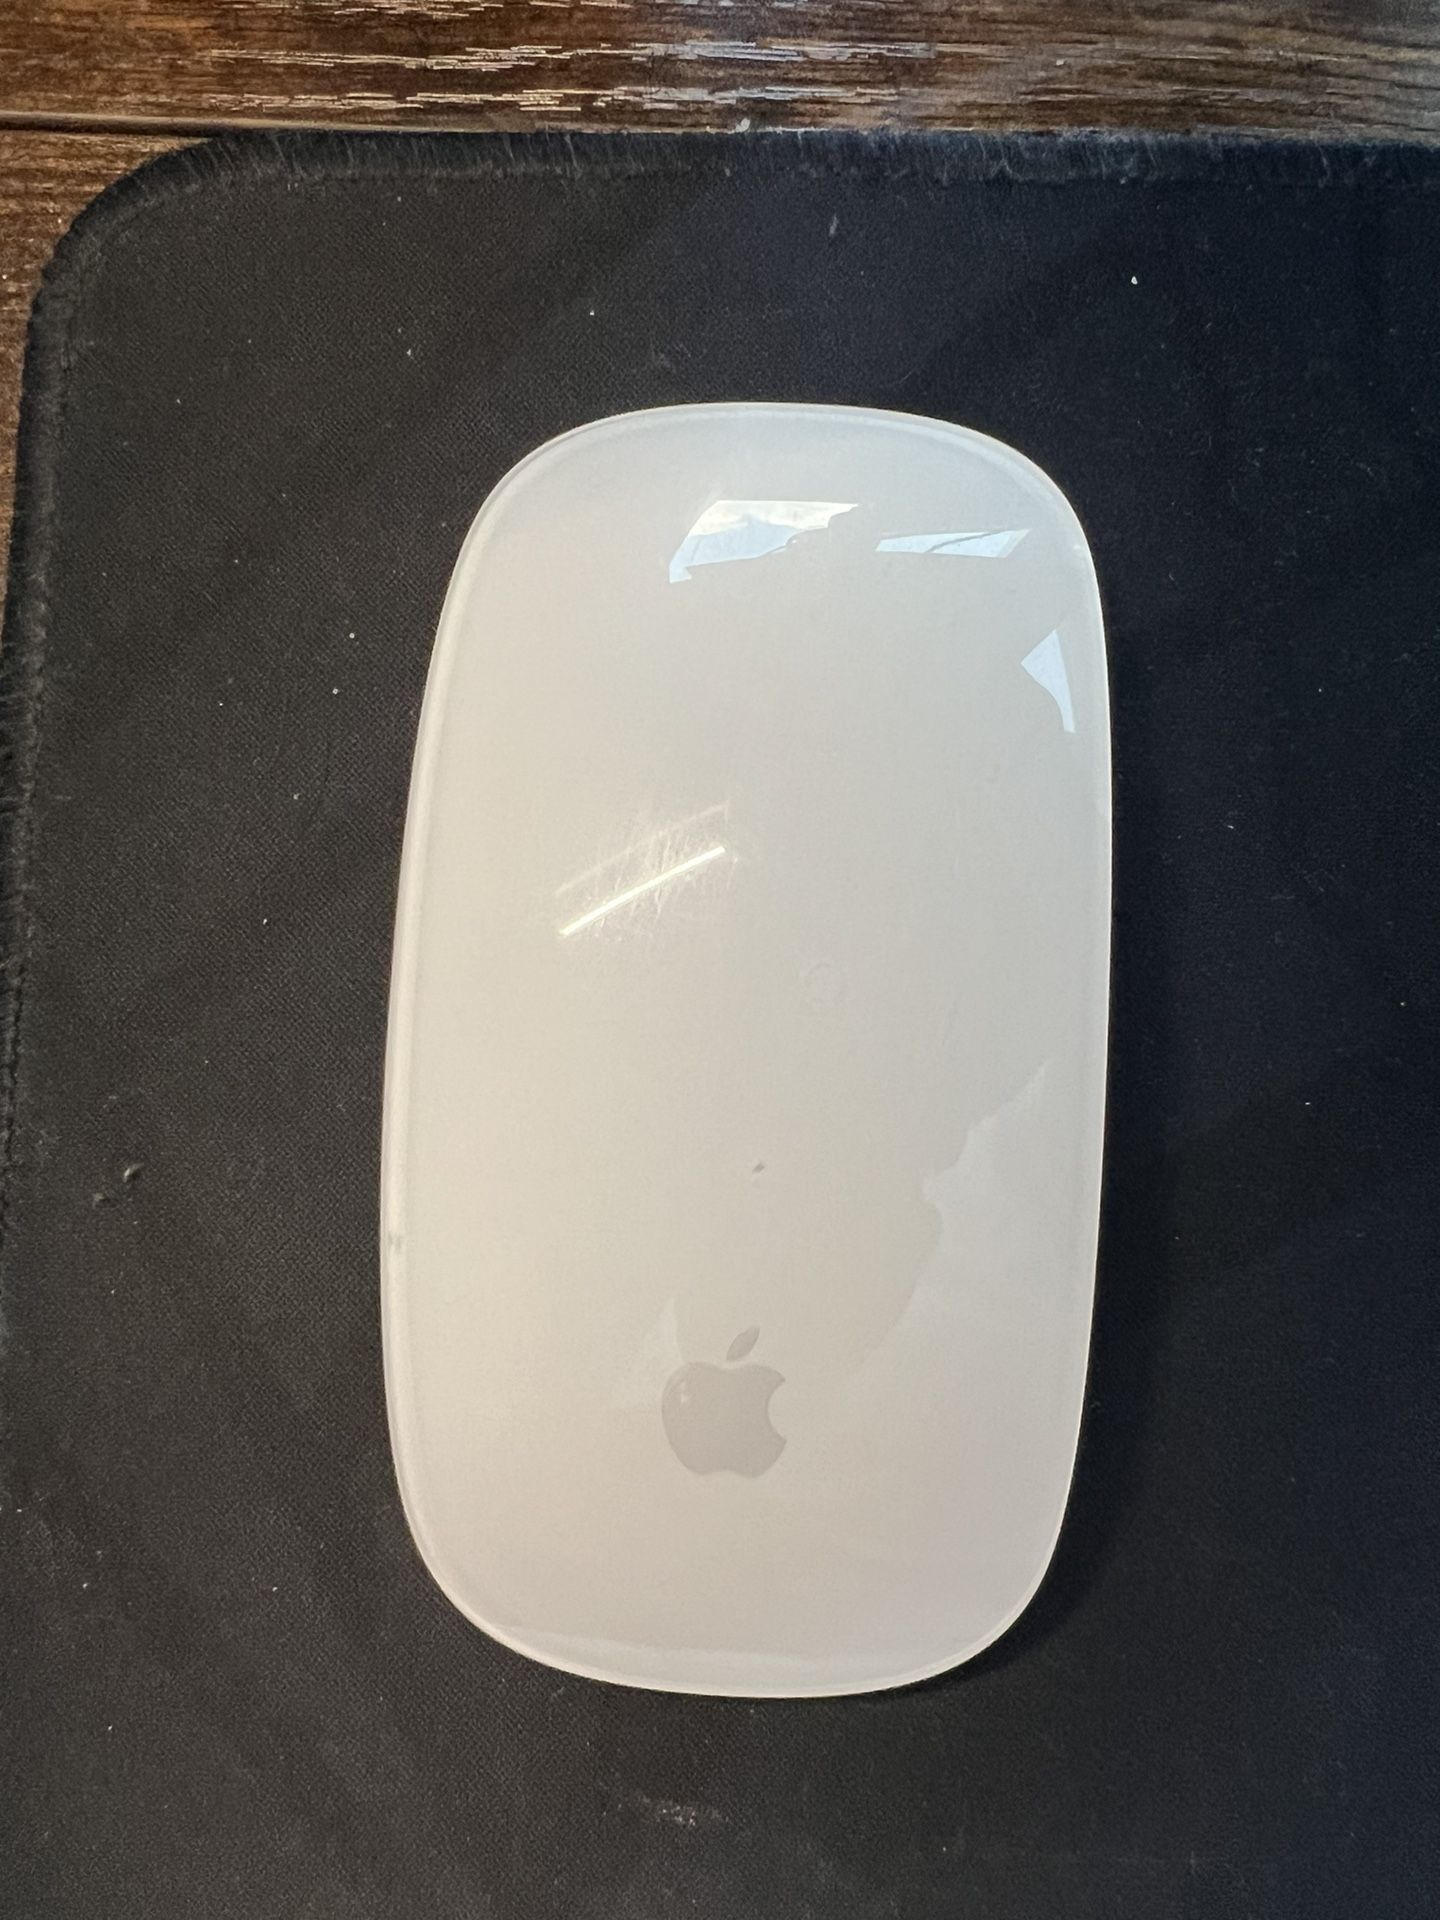 Apple mouse and Keyboard 